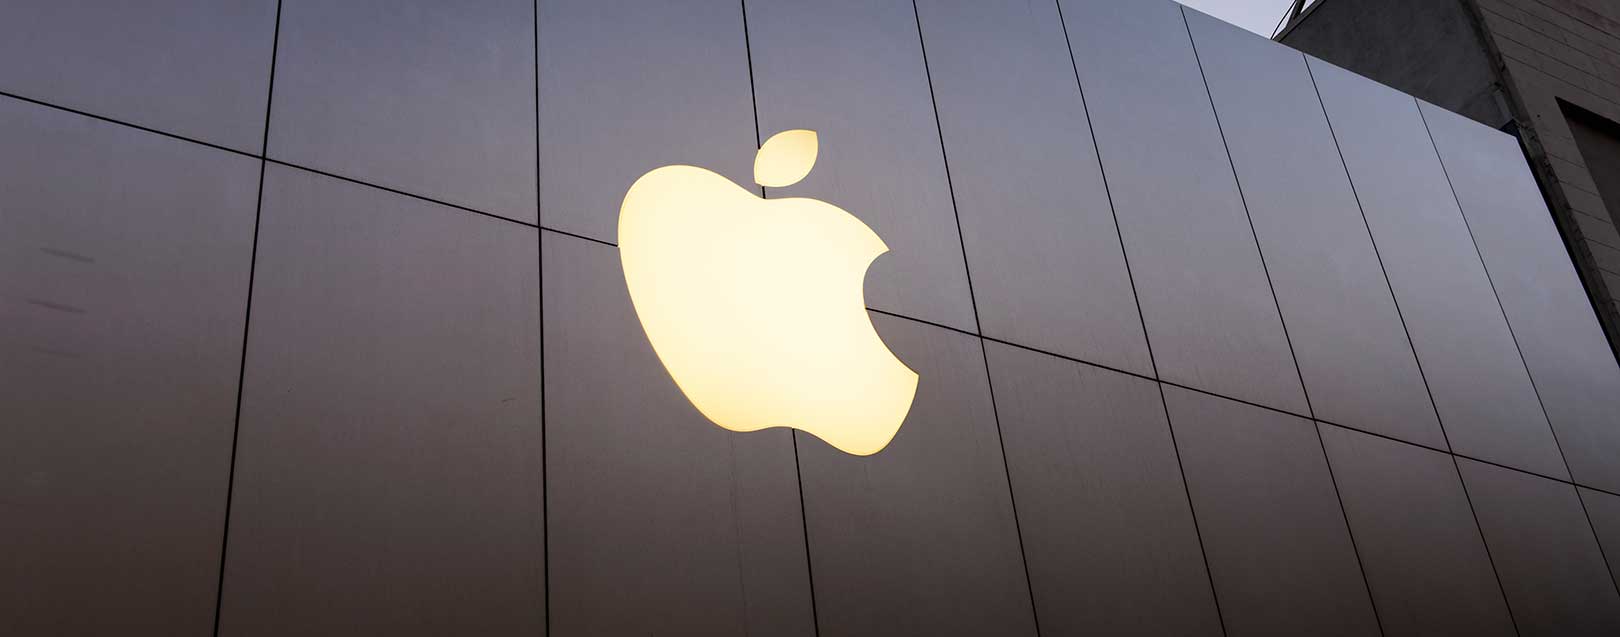 Apple optimistic of capturing the growing share of India's market